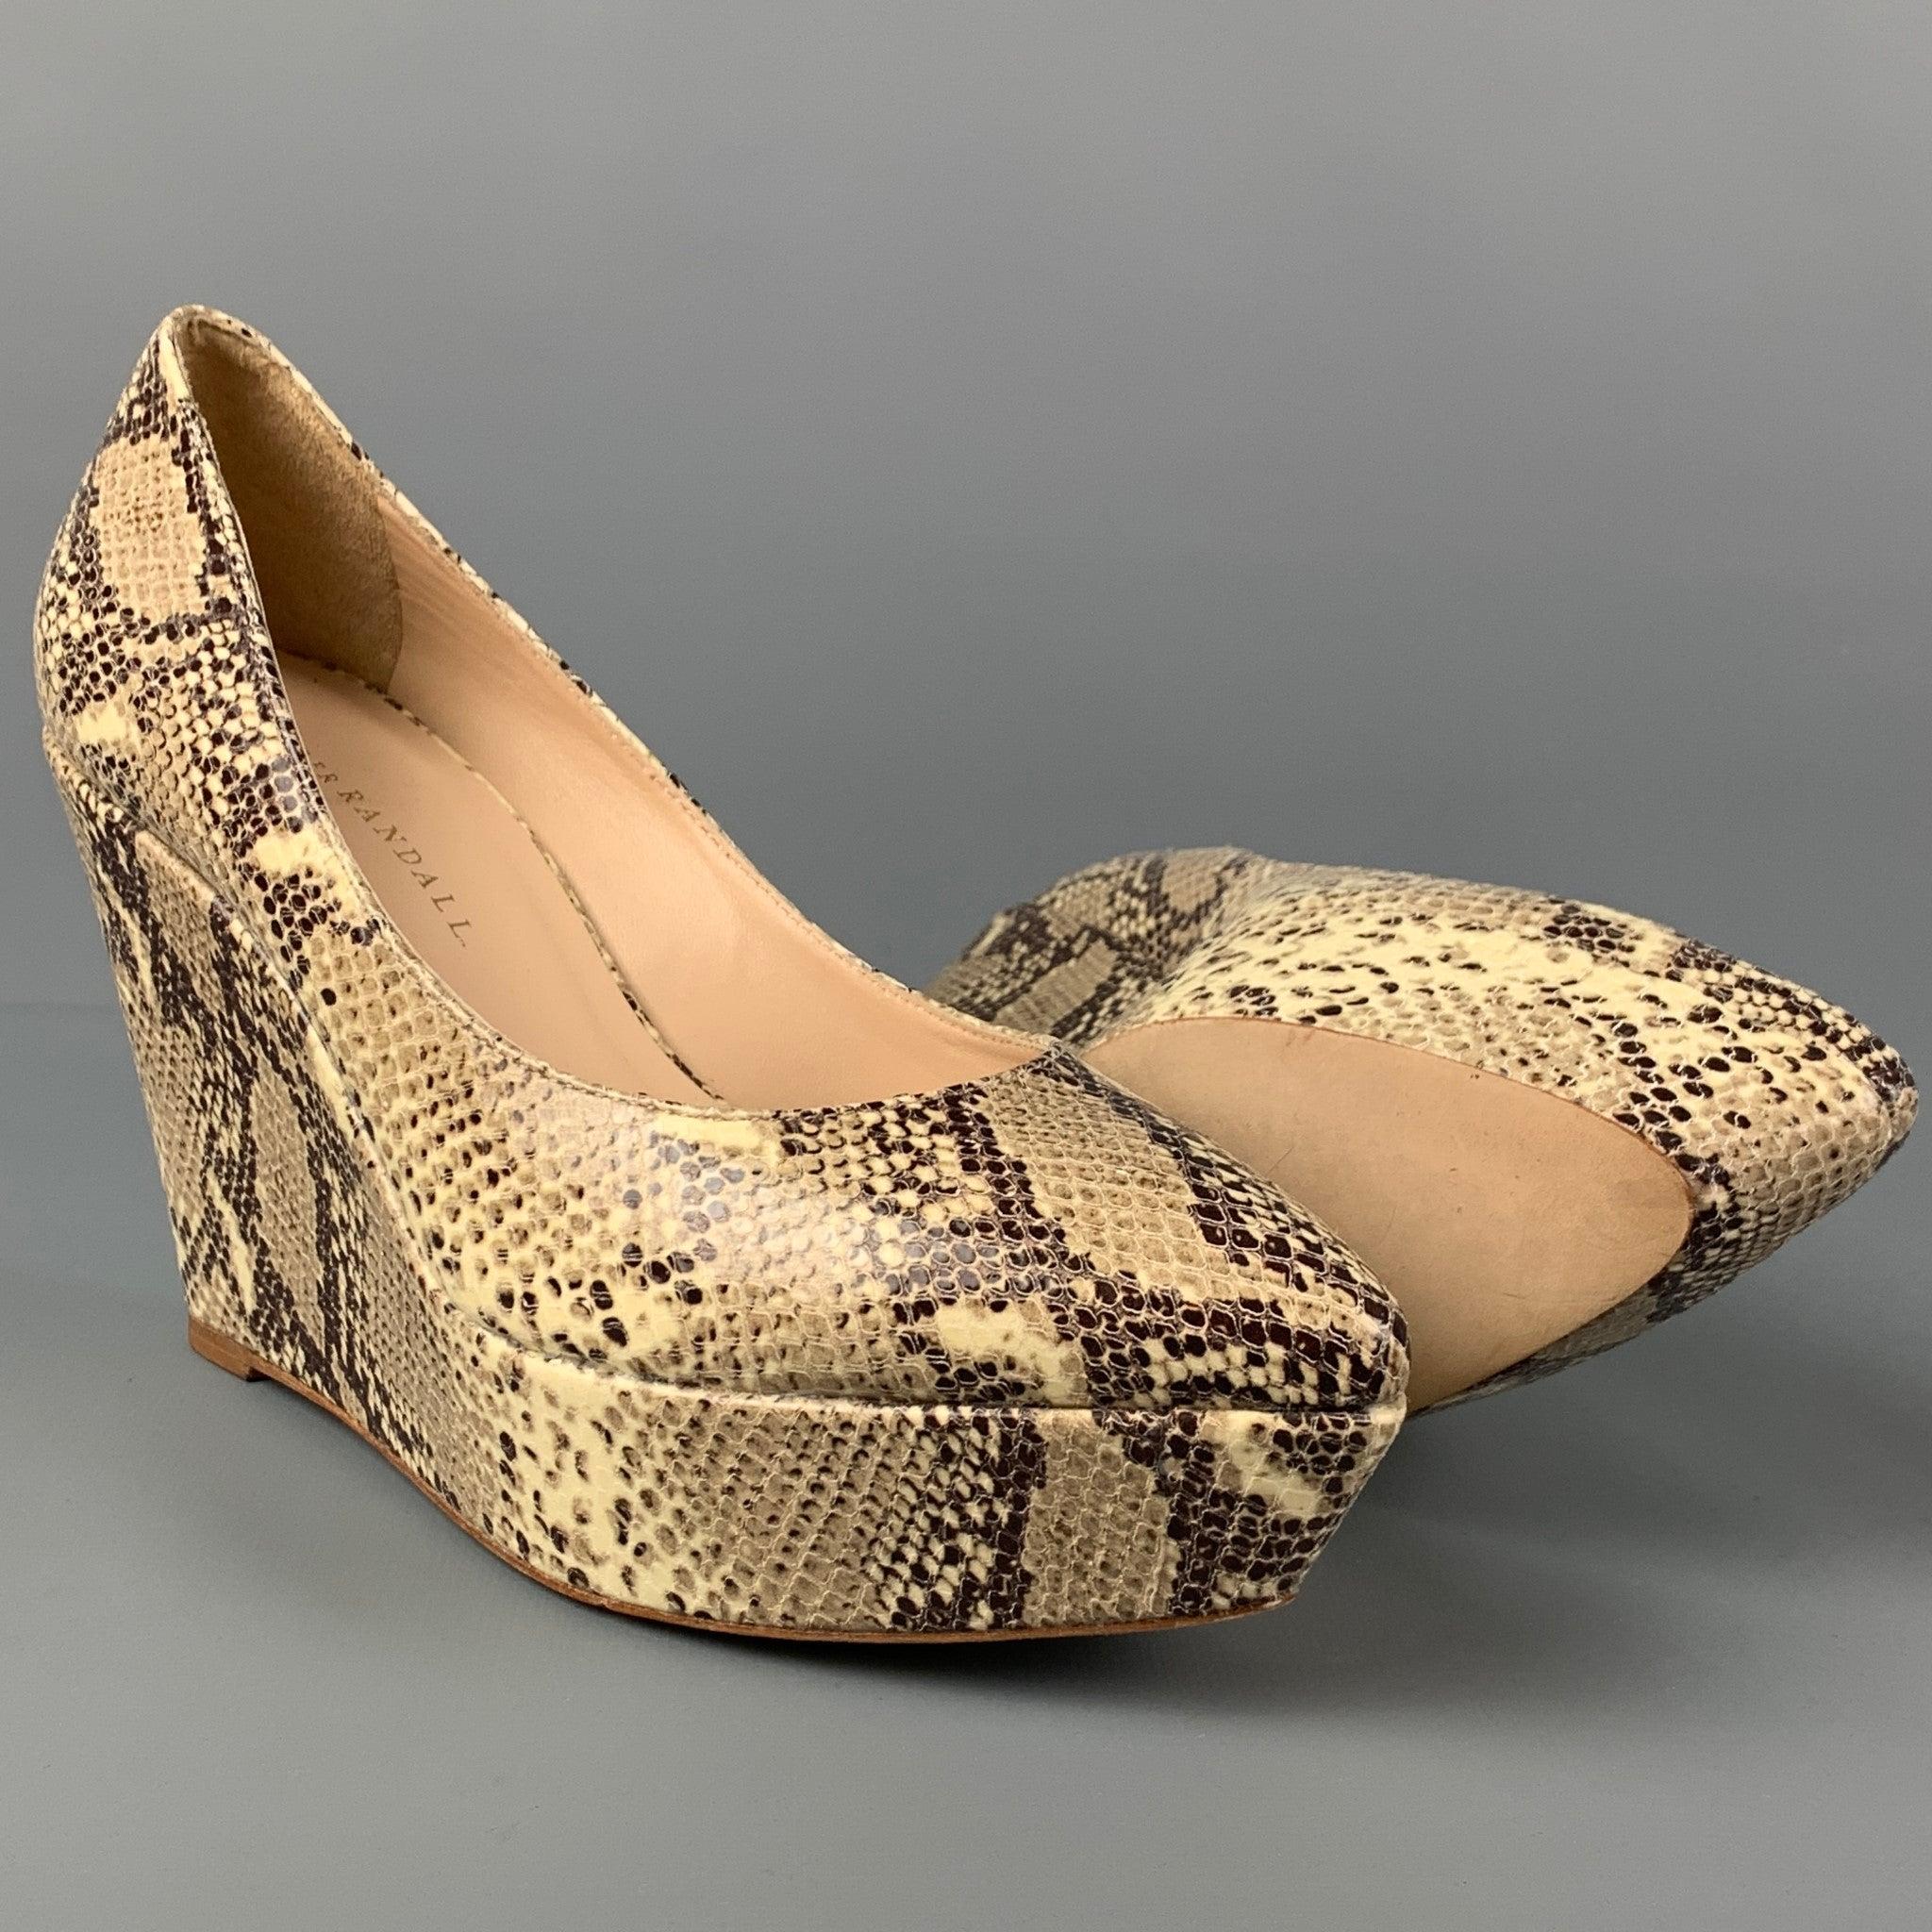 LOEFFLER RANDALL Size 8 Grey Beige Leather Snake Skin Print Embossed Wedge Pumps In Good Condition For Sale In San Francisco, CA